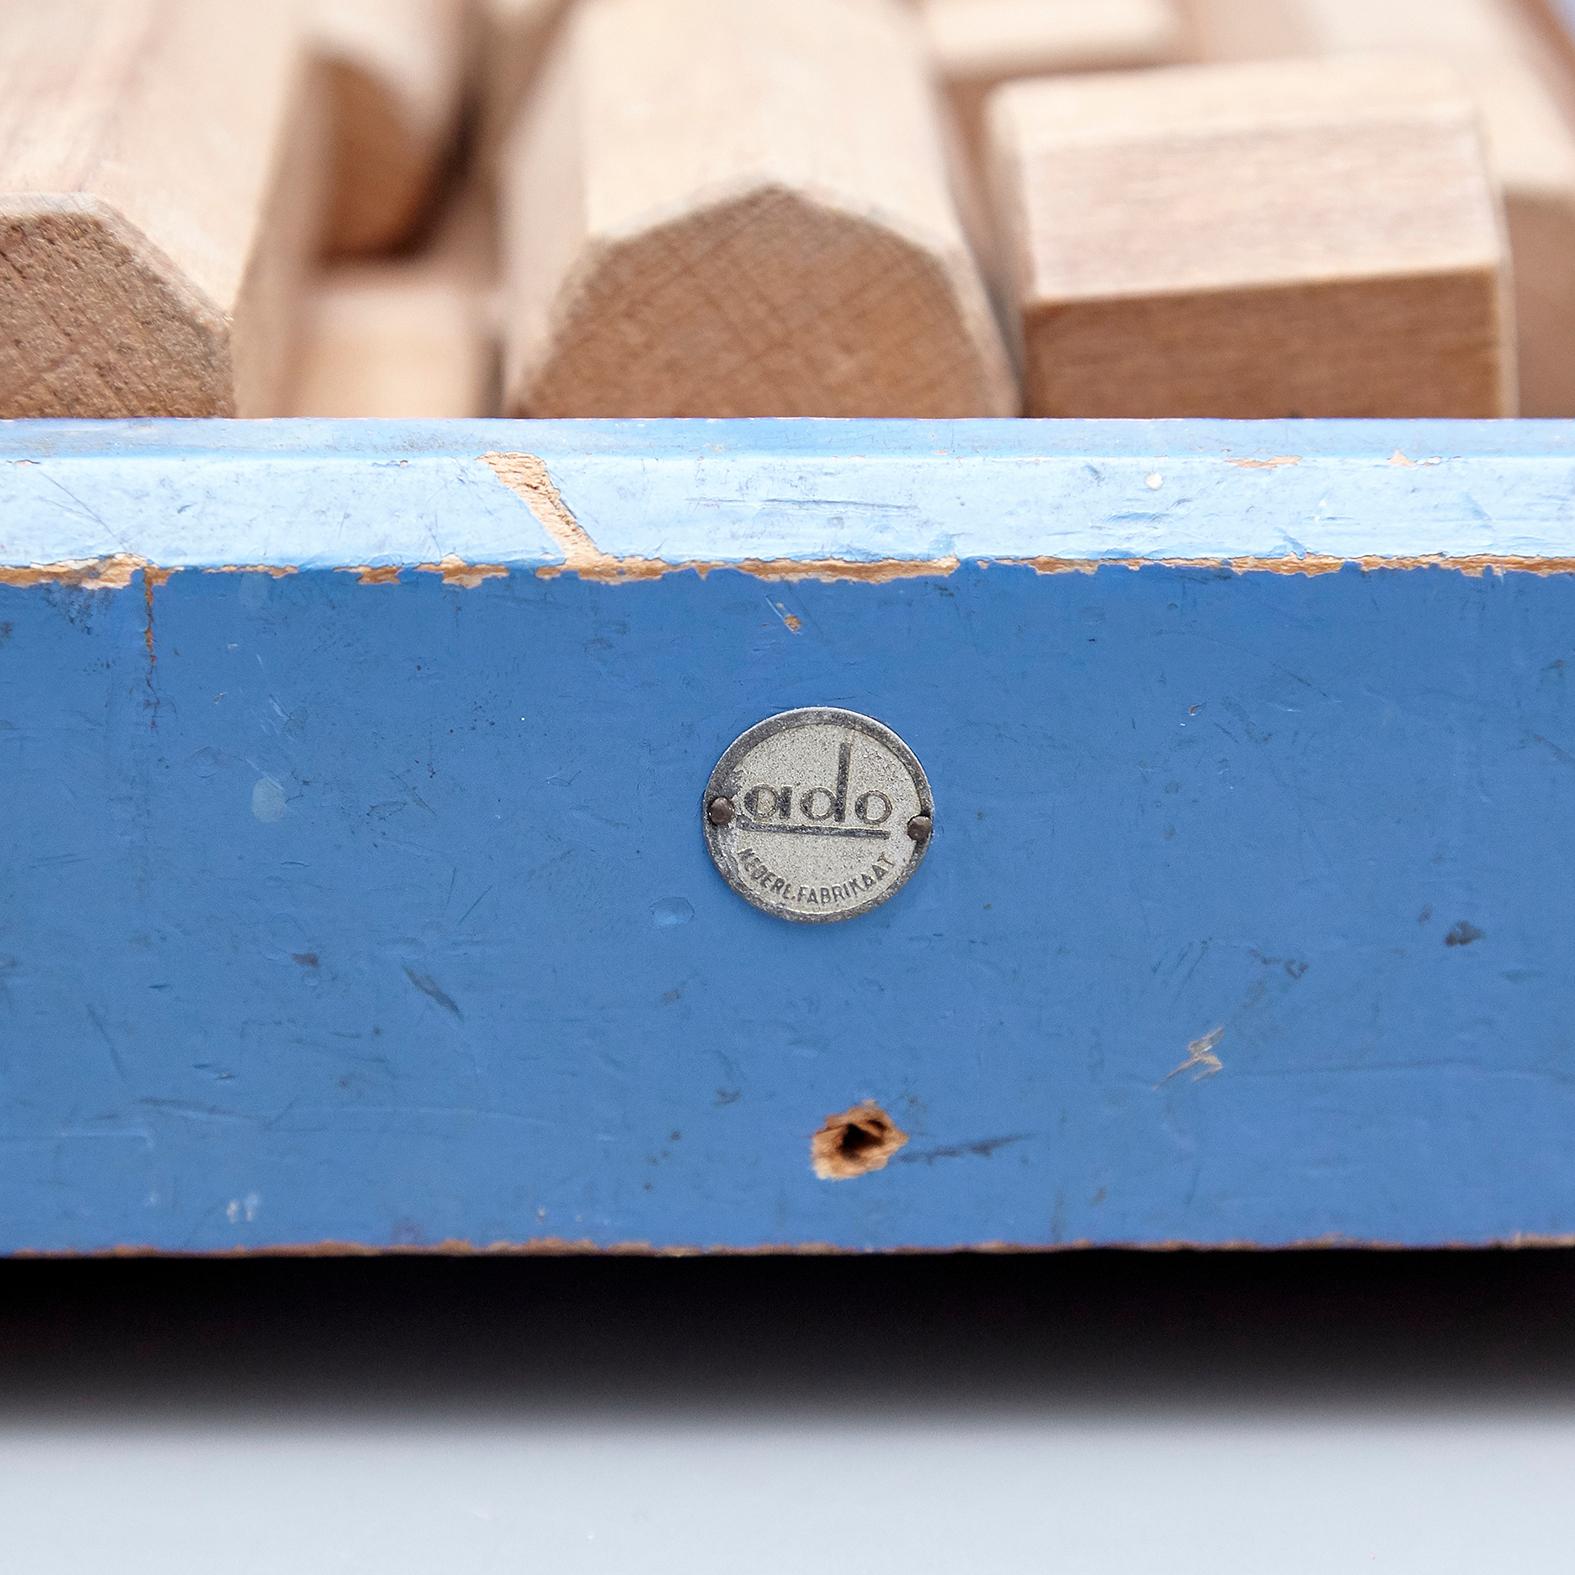 Toy designed by Ko Verzuu, circa 1950.
Manufactured by ADO in Netherlands.

Blue trailer with wooden wheel and set of blocks.

Signed with an ADO metal plate.

In good original condition, with minor wear consistent with age and use,